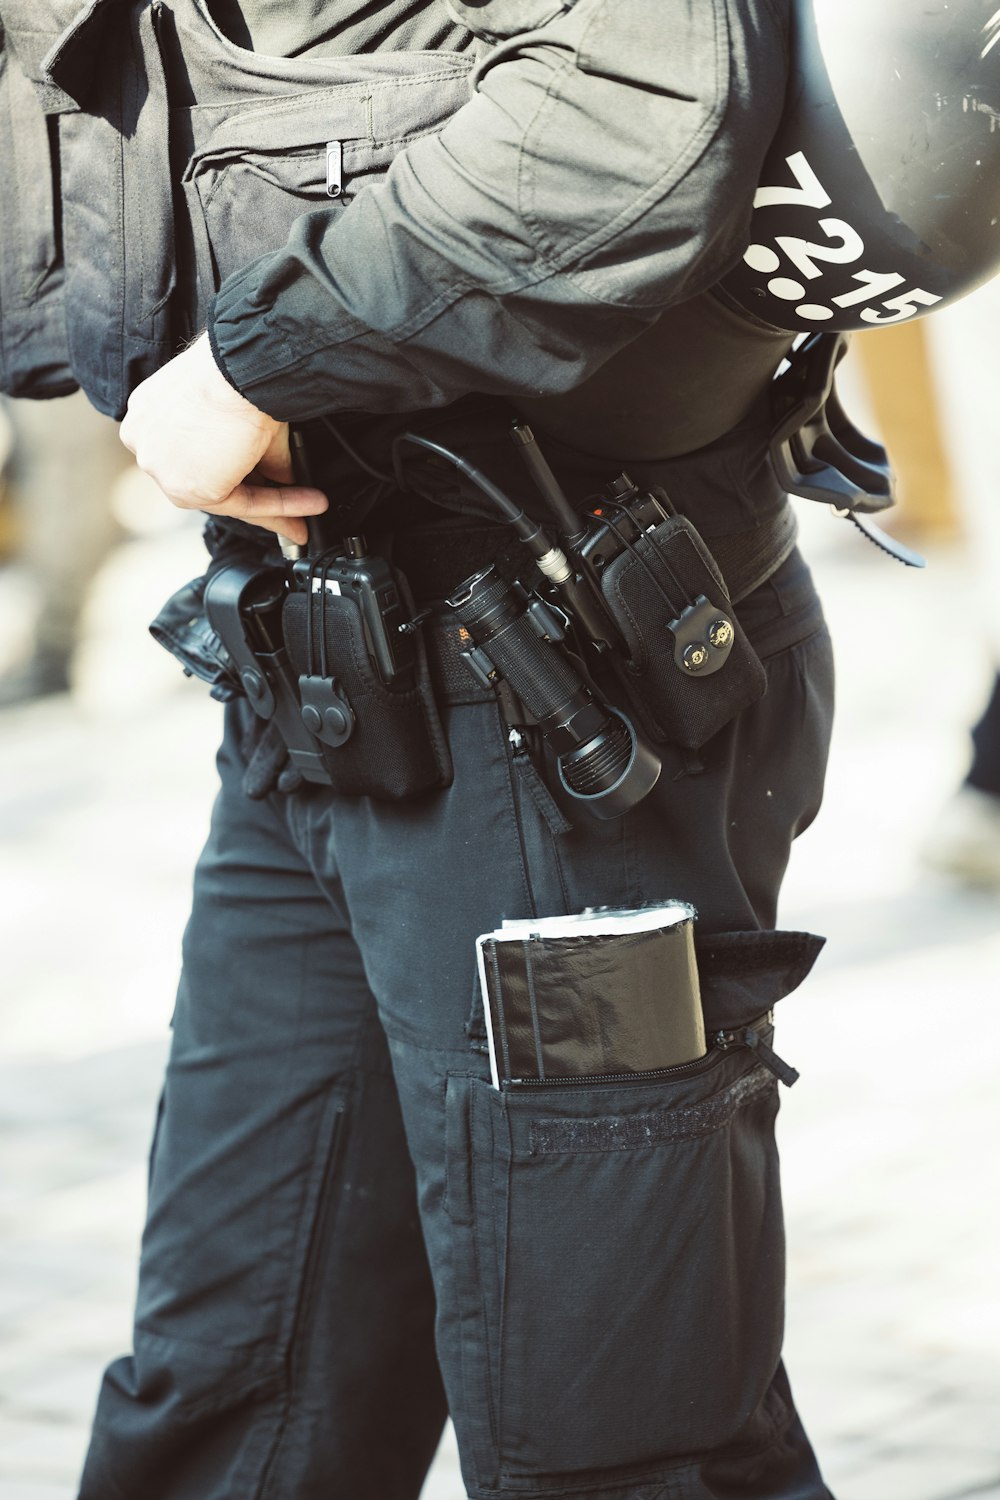 a police officer is holding a gun and a helmet